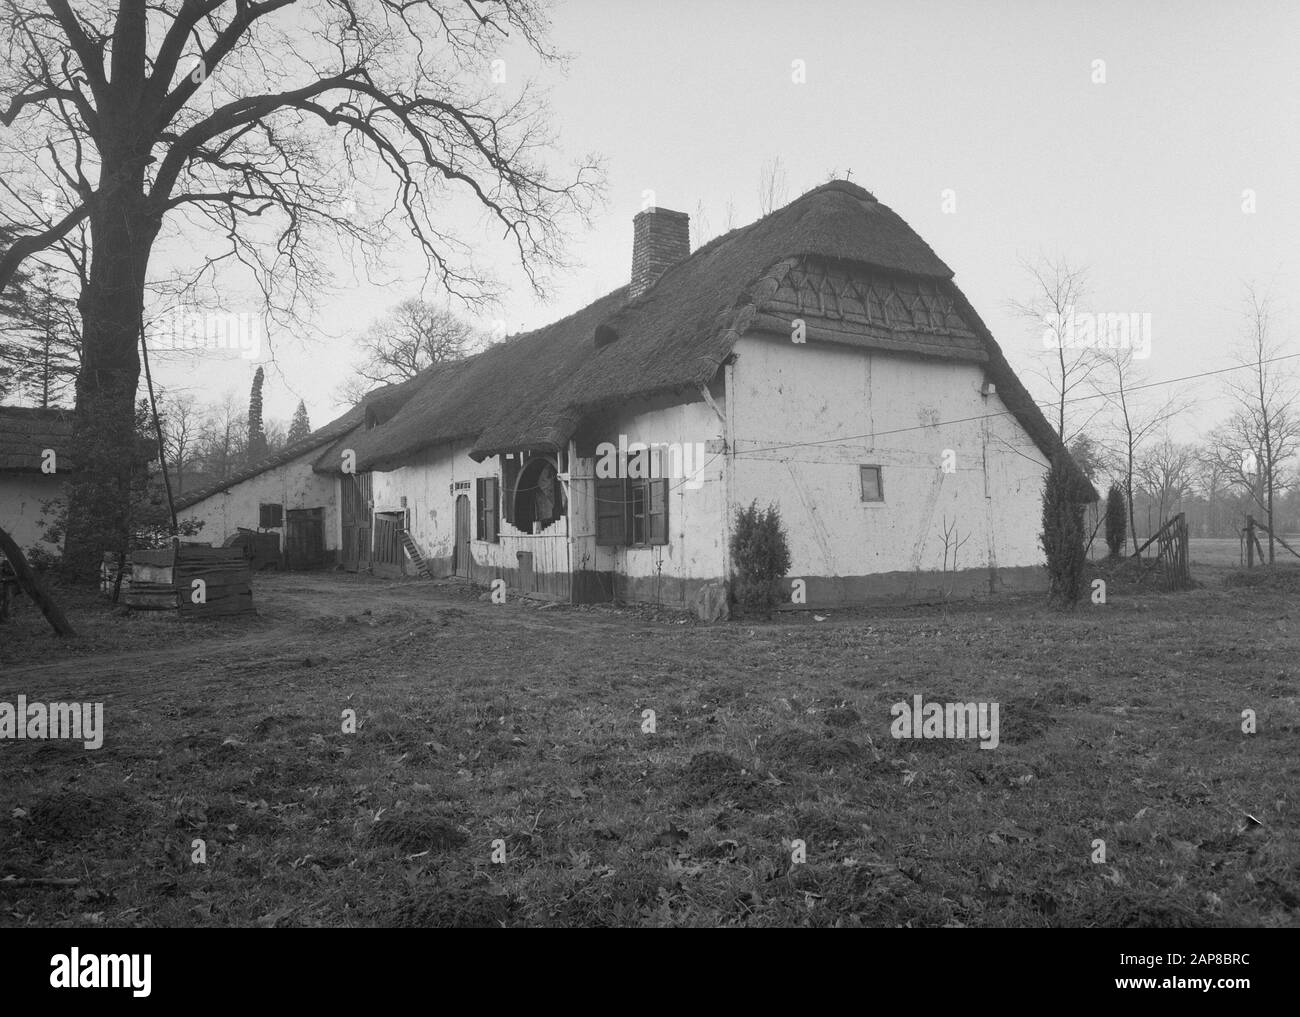 Farm will be moved to Belgian Open Air Museum Domain of Bokrijk at Genk Annotation: Kilbershoeve from Meenen. In 1959 to Open Air Museum Date: January 1957 Location: Belgium Keywords: farms, buildings, open-air museums Stock Photo